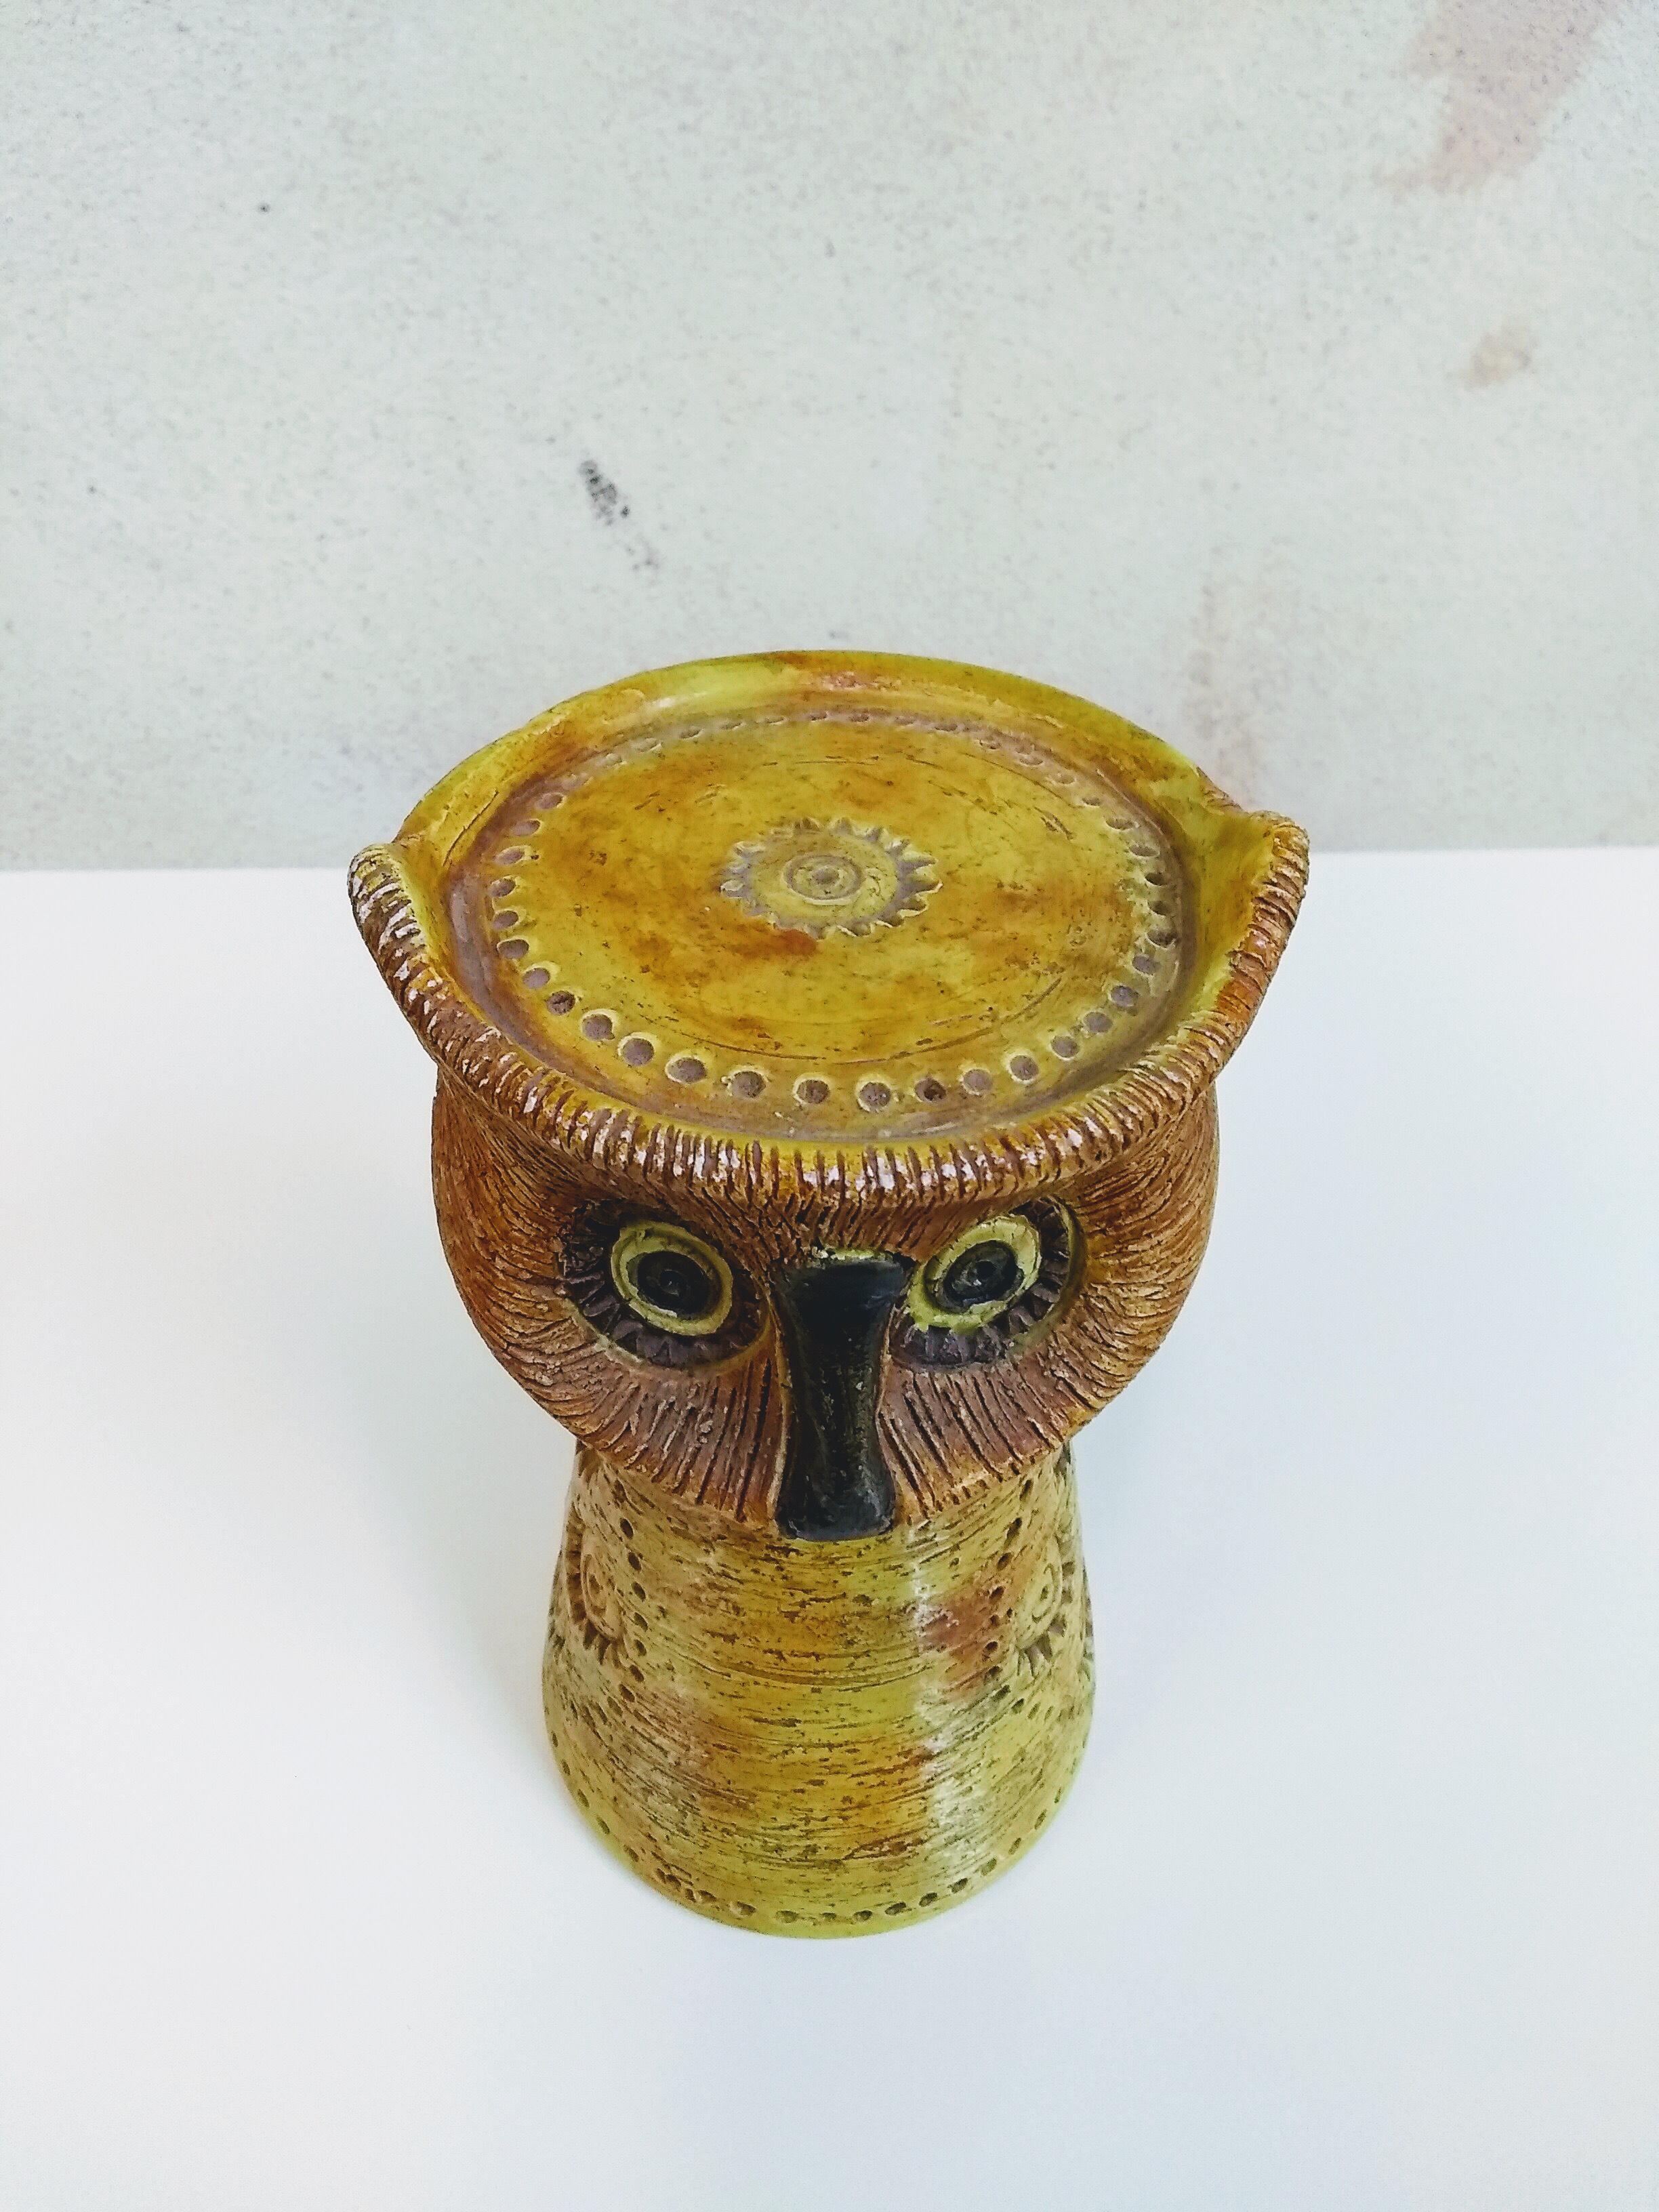 Hand-Crafted Aldo Londi Italian Ceramic Owl for Bitossi imported by Rosenthal and Netter